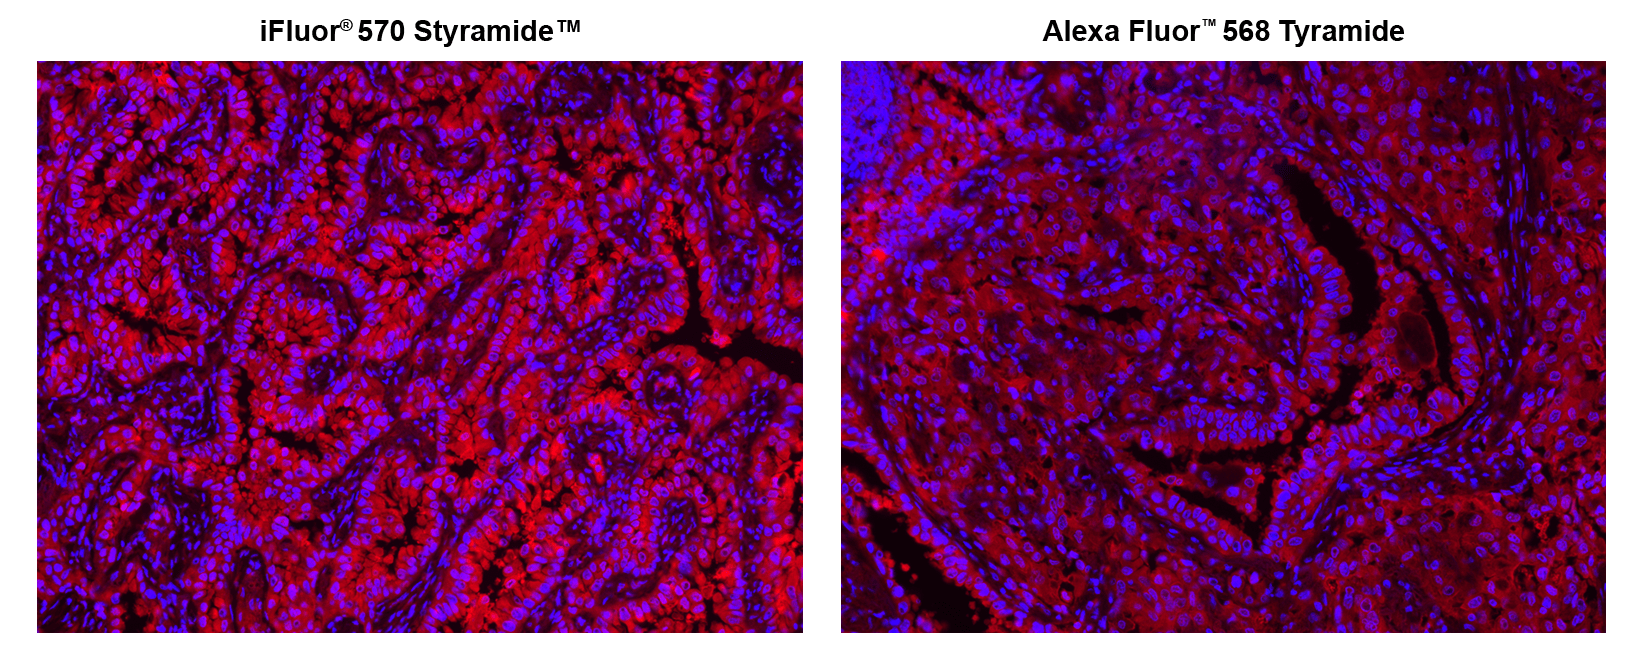 Fluorescence IHC was performed on formaldehyde-fixed, paraffin-embedded human lung adenocarcinoma-positive tissue using PSA™ and TSA amplified methods. First, the tissue sections were stained with rabbit anti-EpCam antibody and then incubated with polyHRP-labeled Goat anti-Rabbit IgG secondary antibody. The signal was developed using either iFluor® 570 Styramide™ (Cat No. 45031) or Alexa Fluor® 568 tyramide stain, respectively, and detected with a Cy3/TRITC filter set. Finally, the nuclei (blue) were counterstained with DAPI (Cat No. 17507).